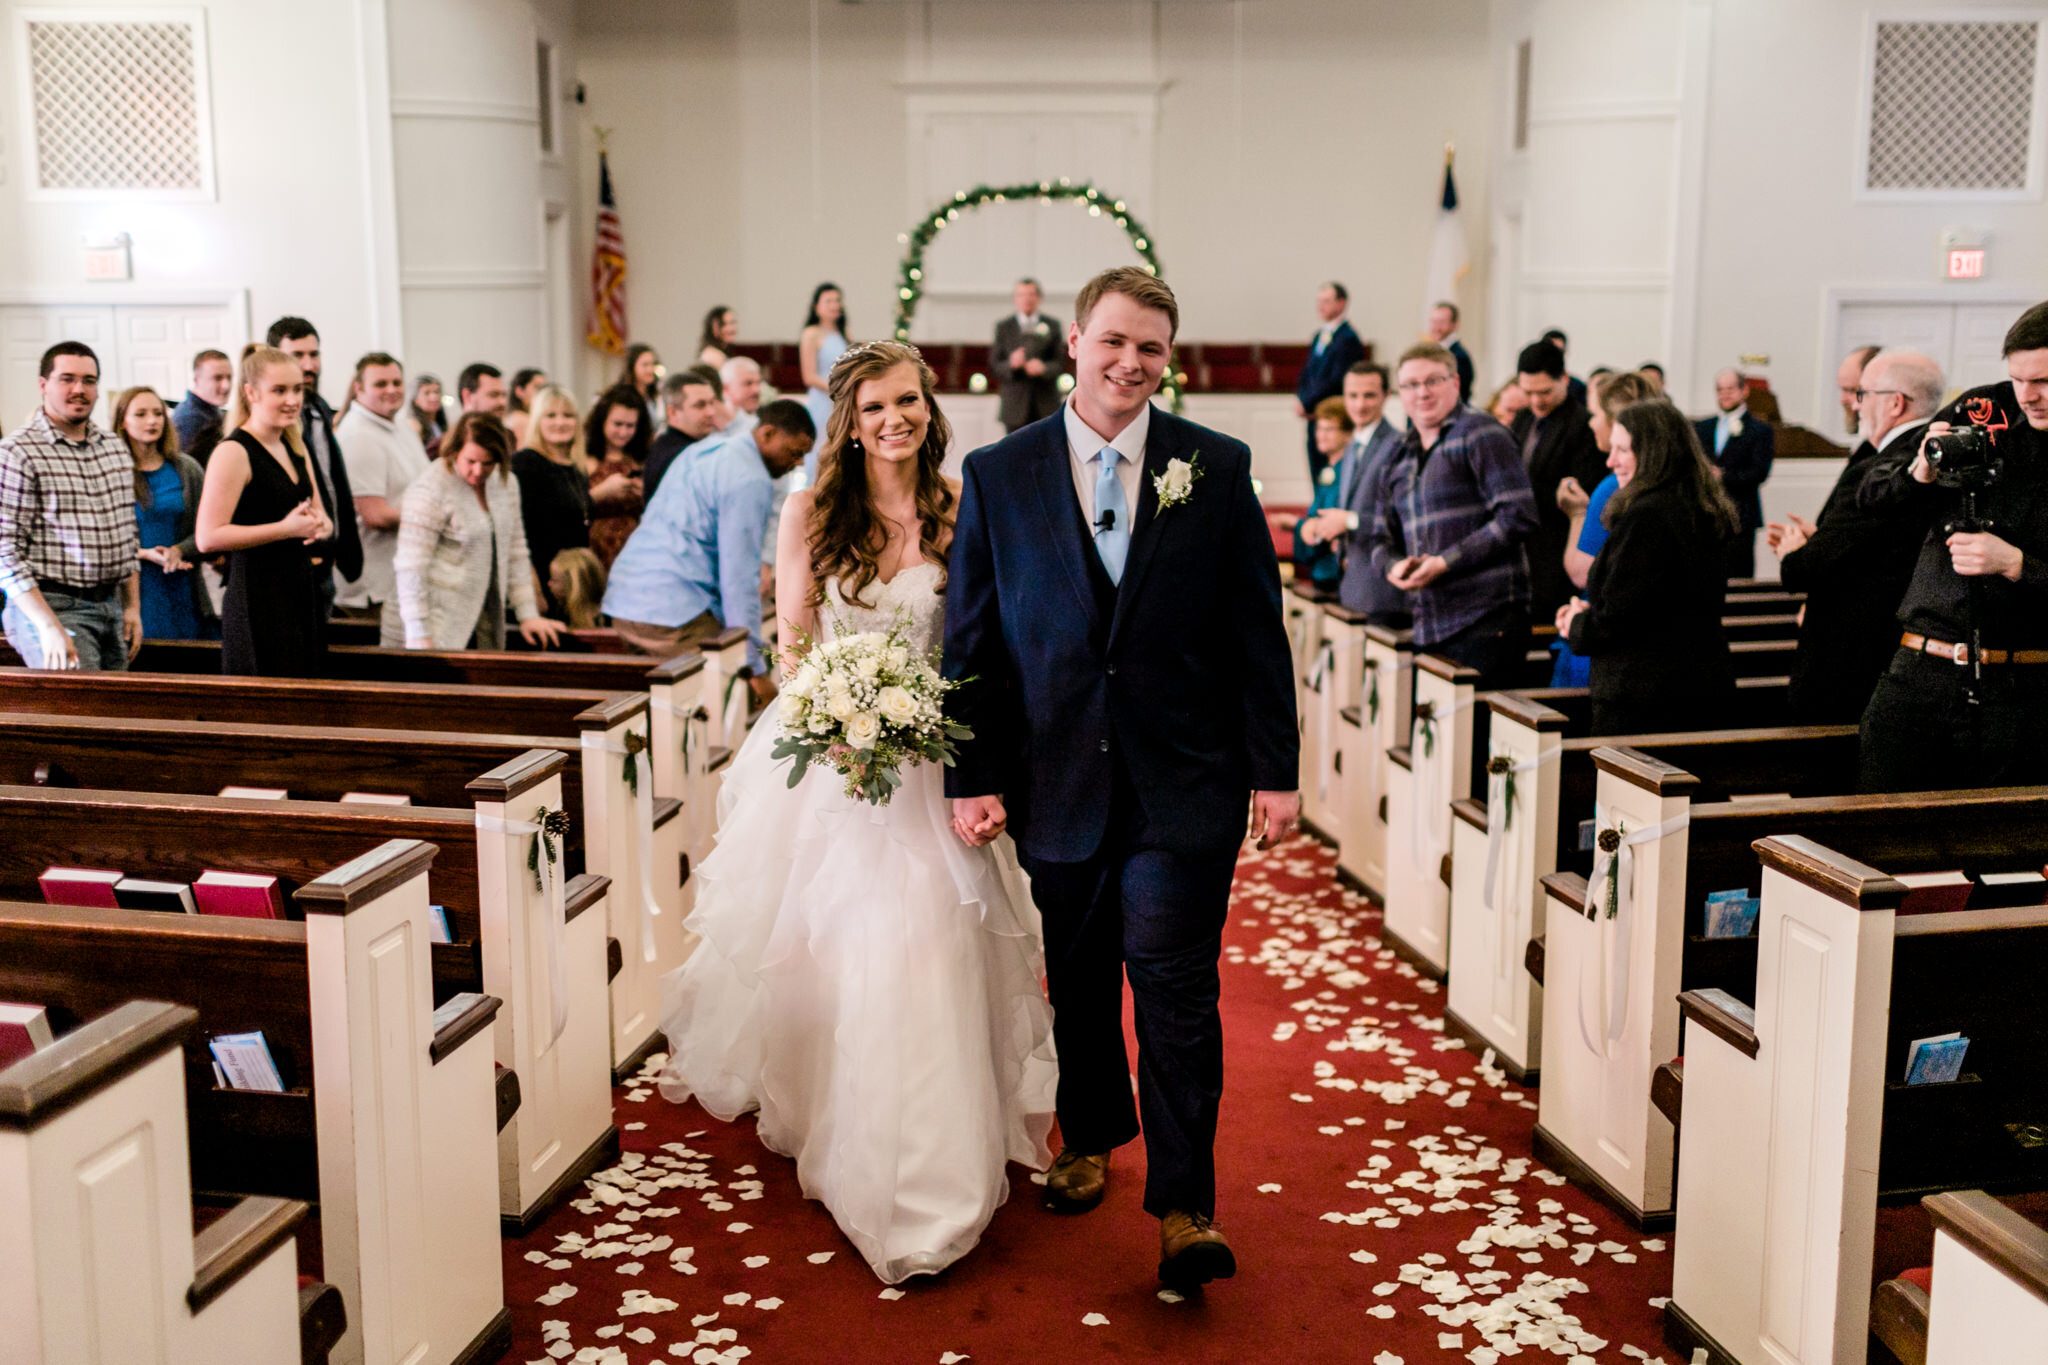 Durham Wedding Photographer | By G. Lin Photography | Bride and groom walking down aisle after ceremony